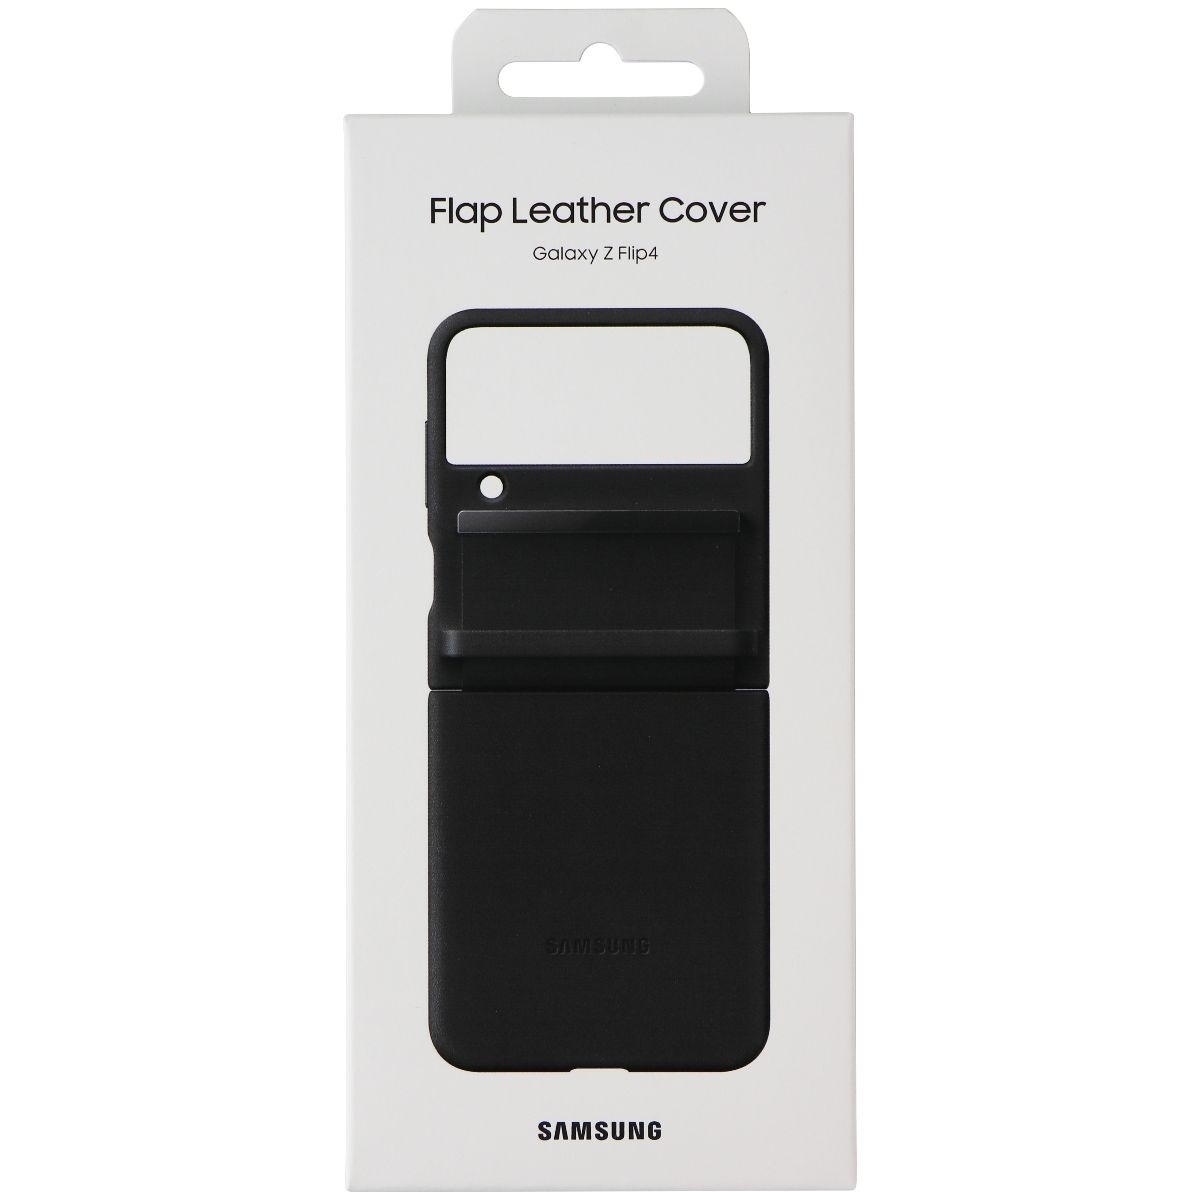 Samsung Official Flap Leather Cover Luxury Case For Galaxy Z Flip4 - Black